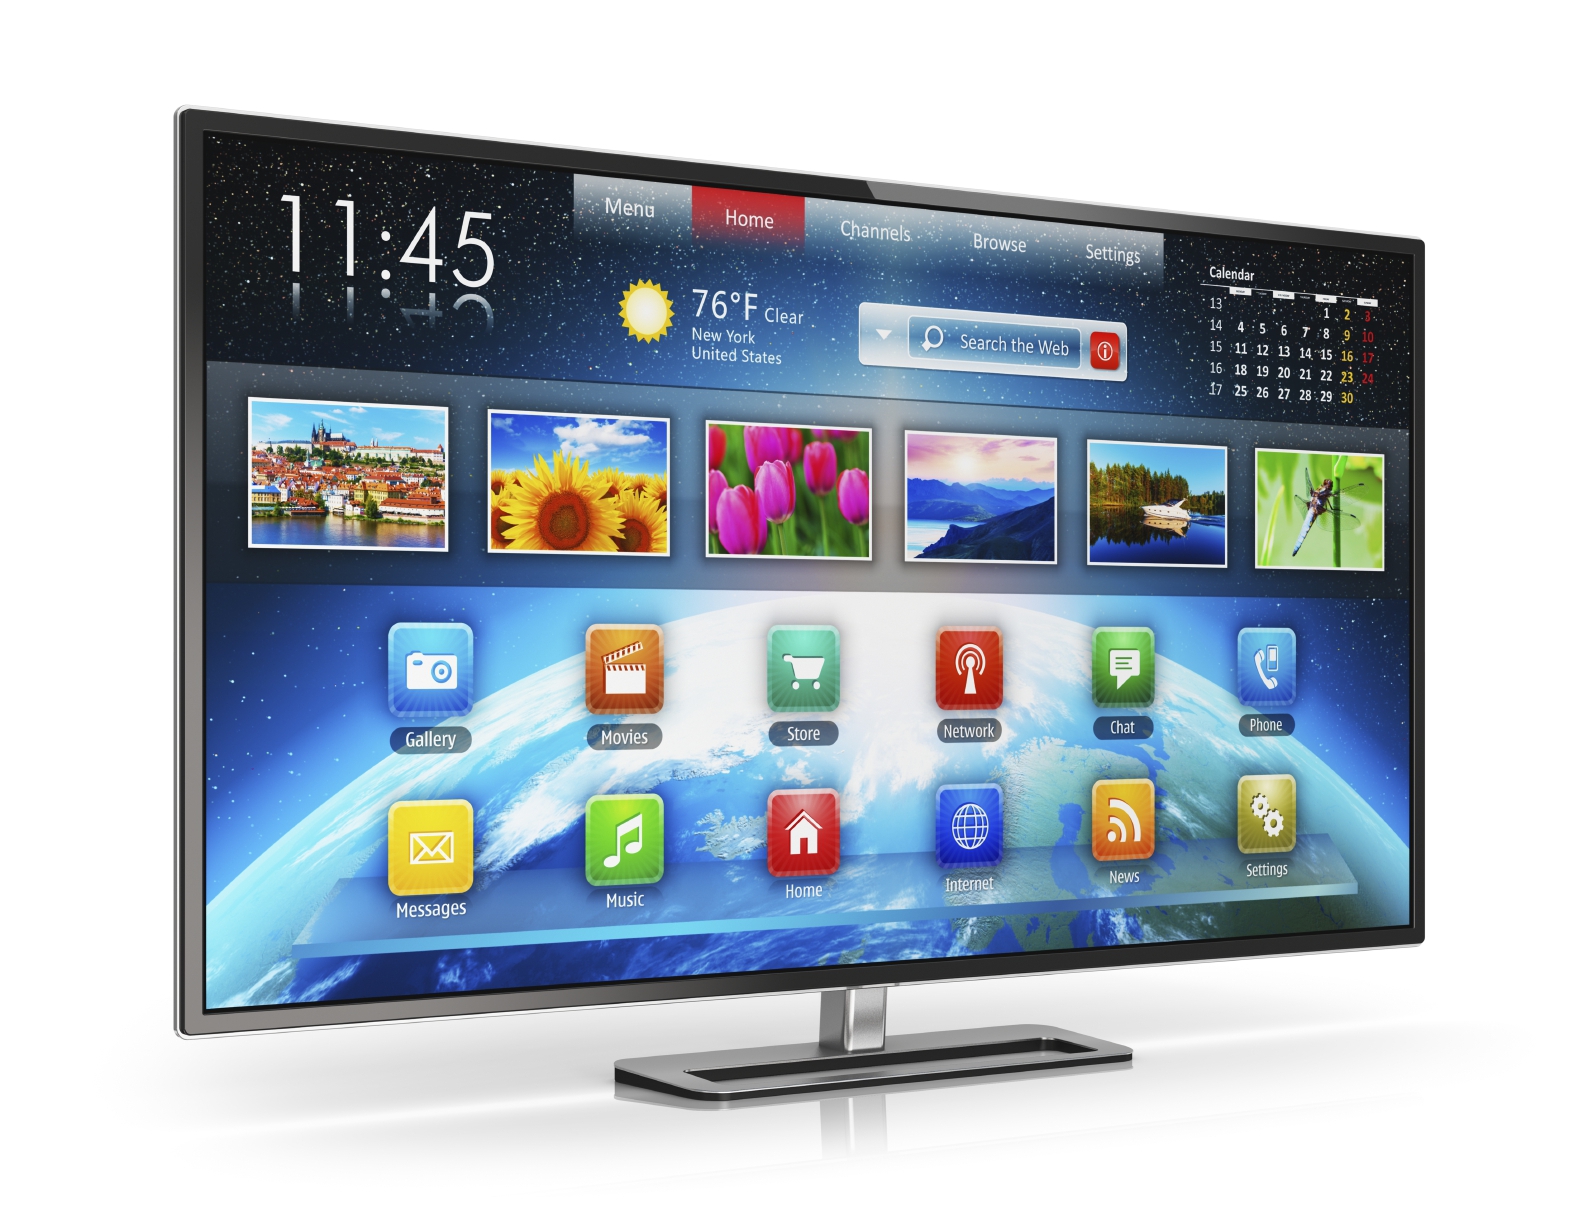 Electronic World have a vast selection of Cheap Smart TVs